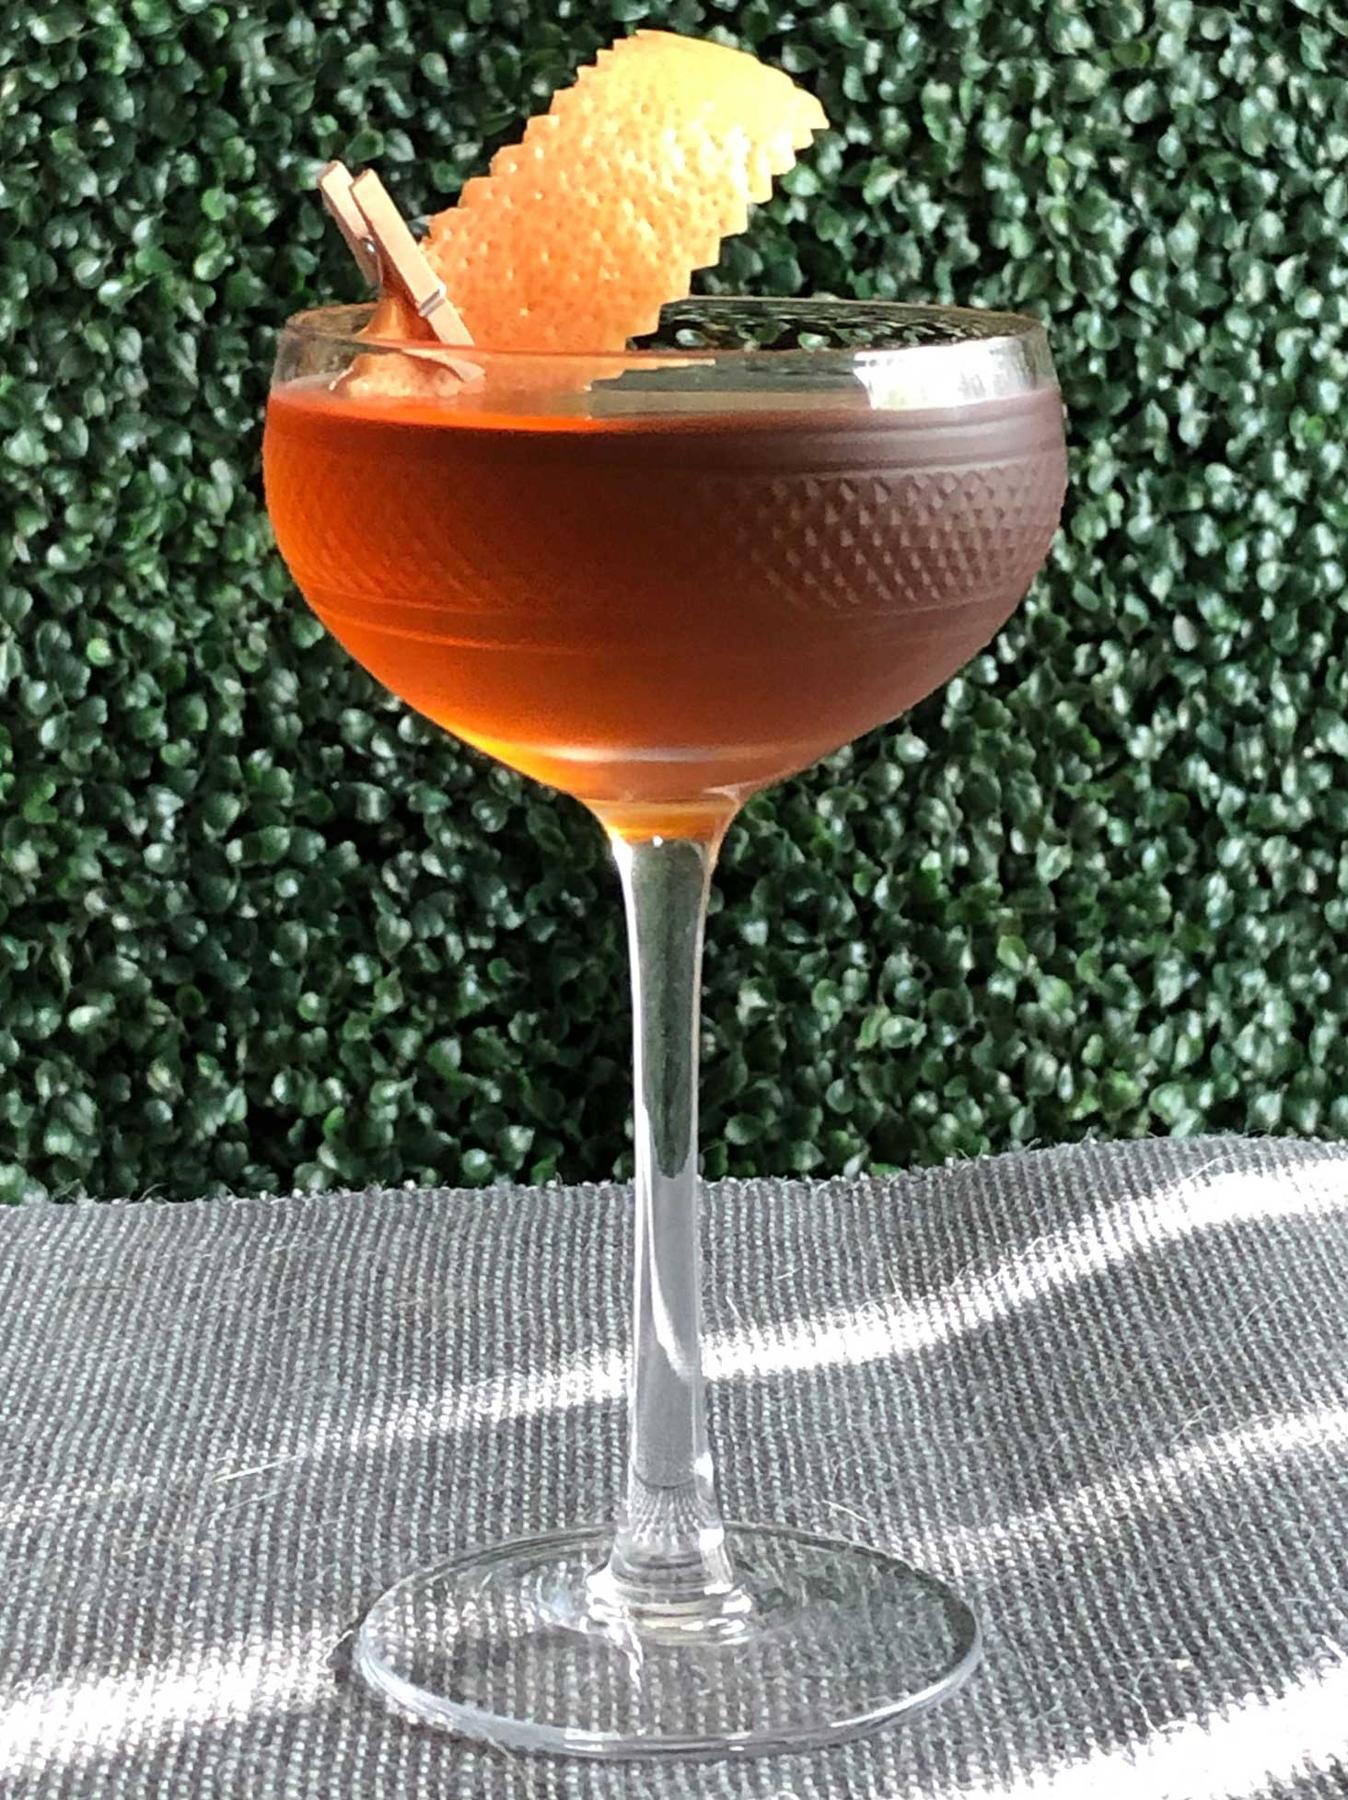 An example of the Diamond in the Rough, the mixed drink (drink) featuring Hayman’s Old Tom Gin, Bonal Gentiane-Quina, Amaro Alta Verde, orange bitters, and grapefruit twist; photo by Lee Edwards